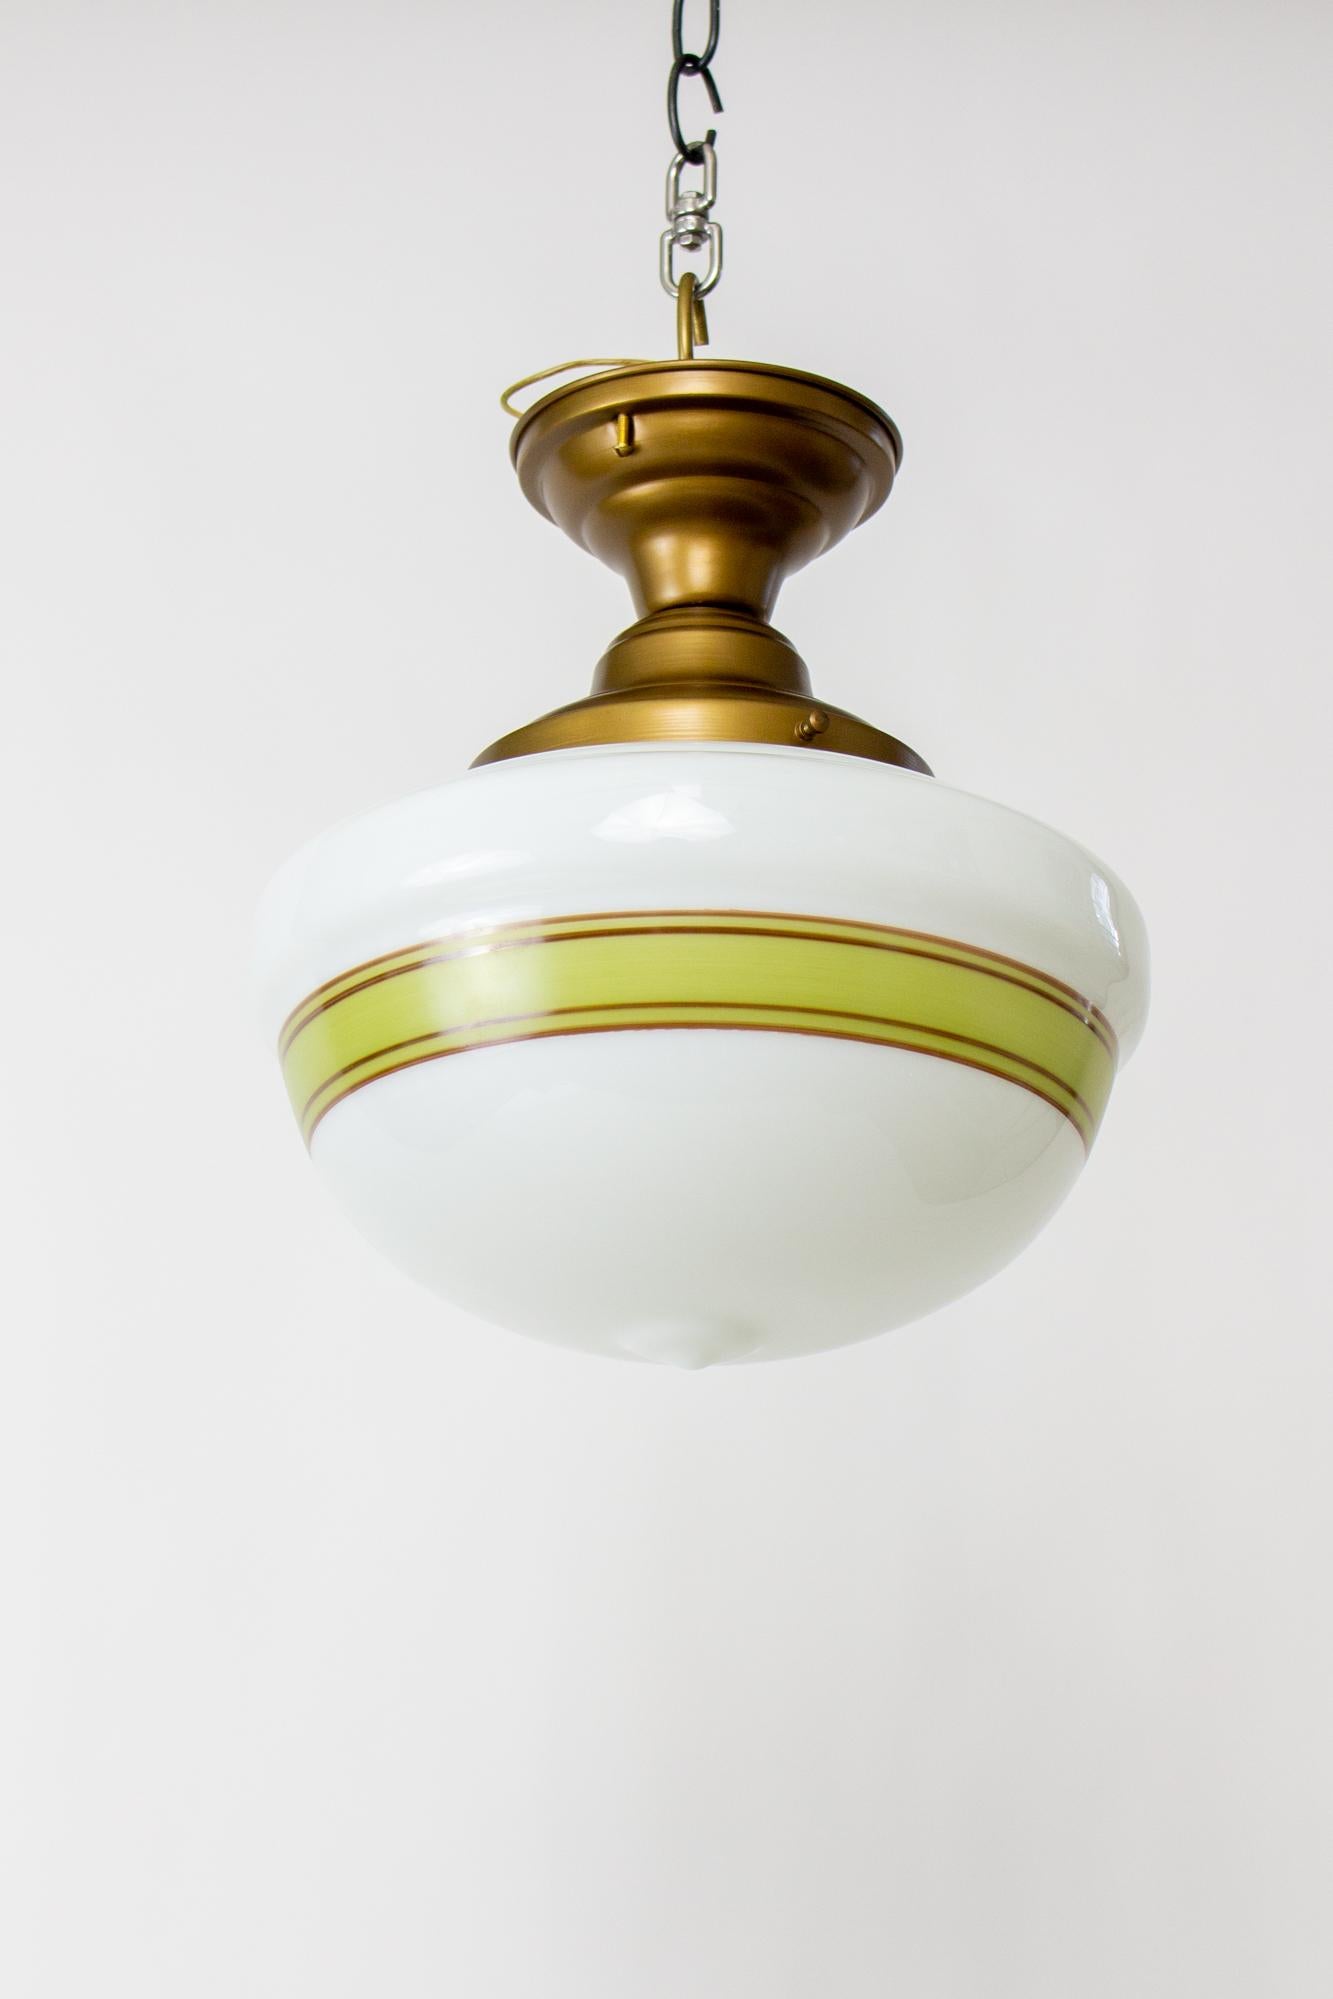 20th Century Flush Mounted Painted Schoolhouse Fixture For Sale